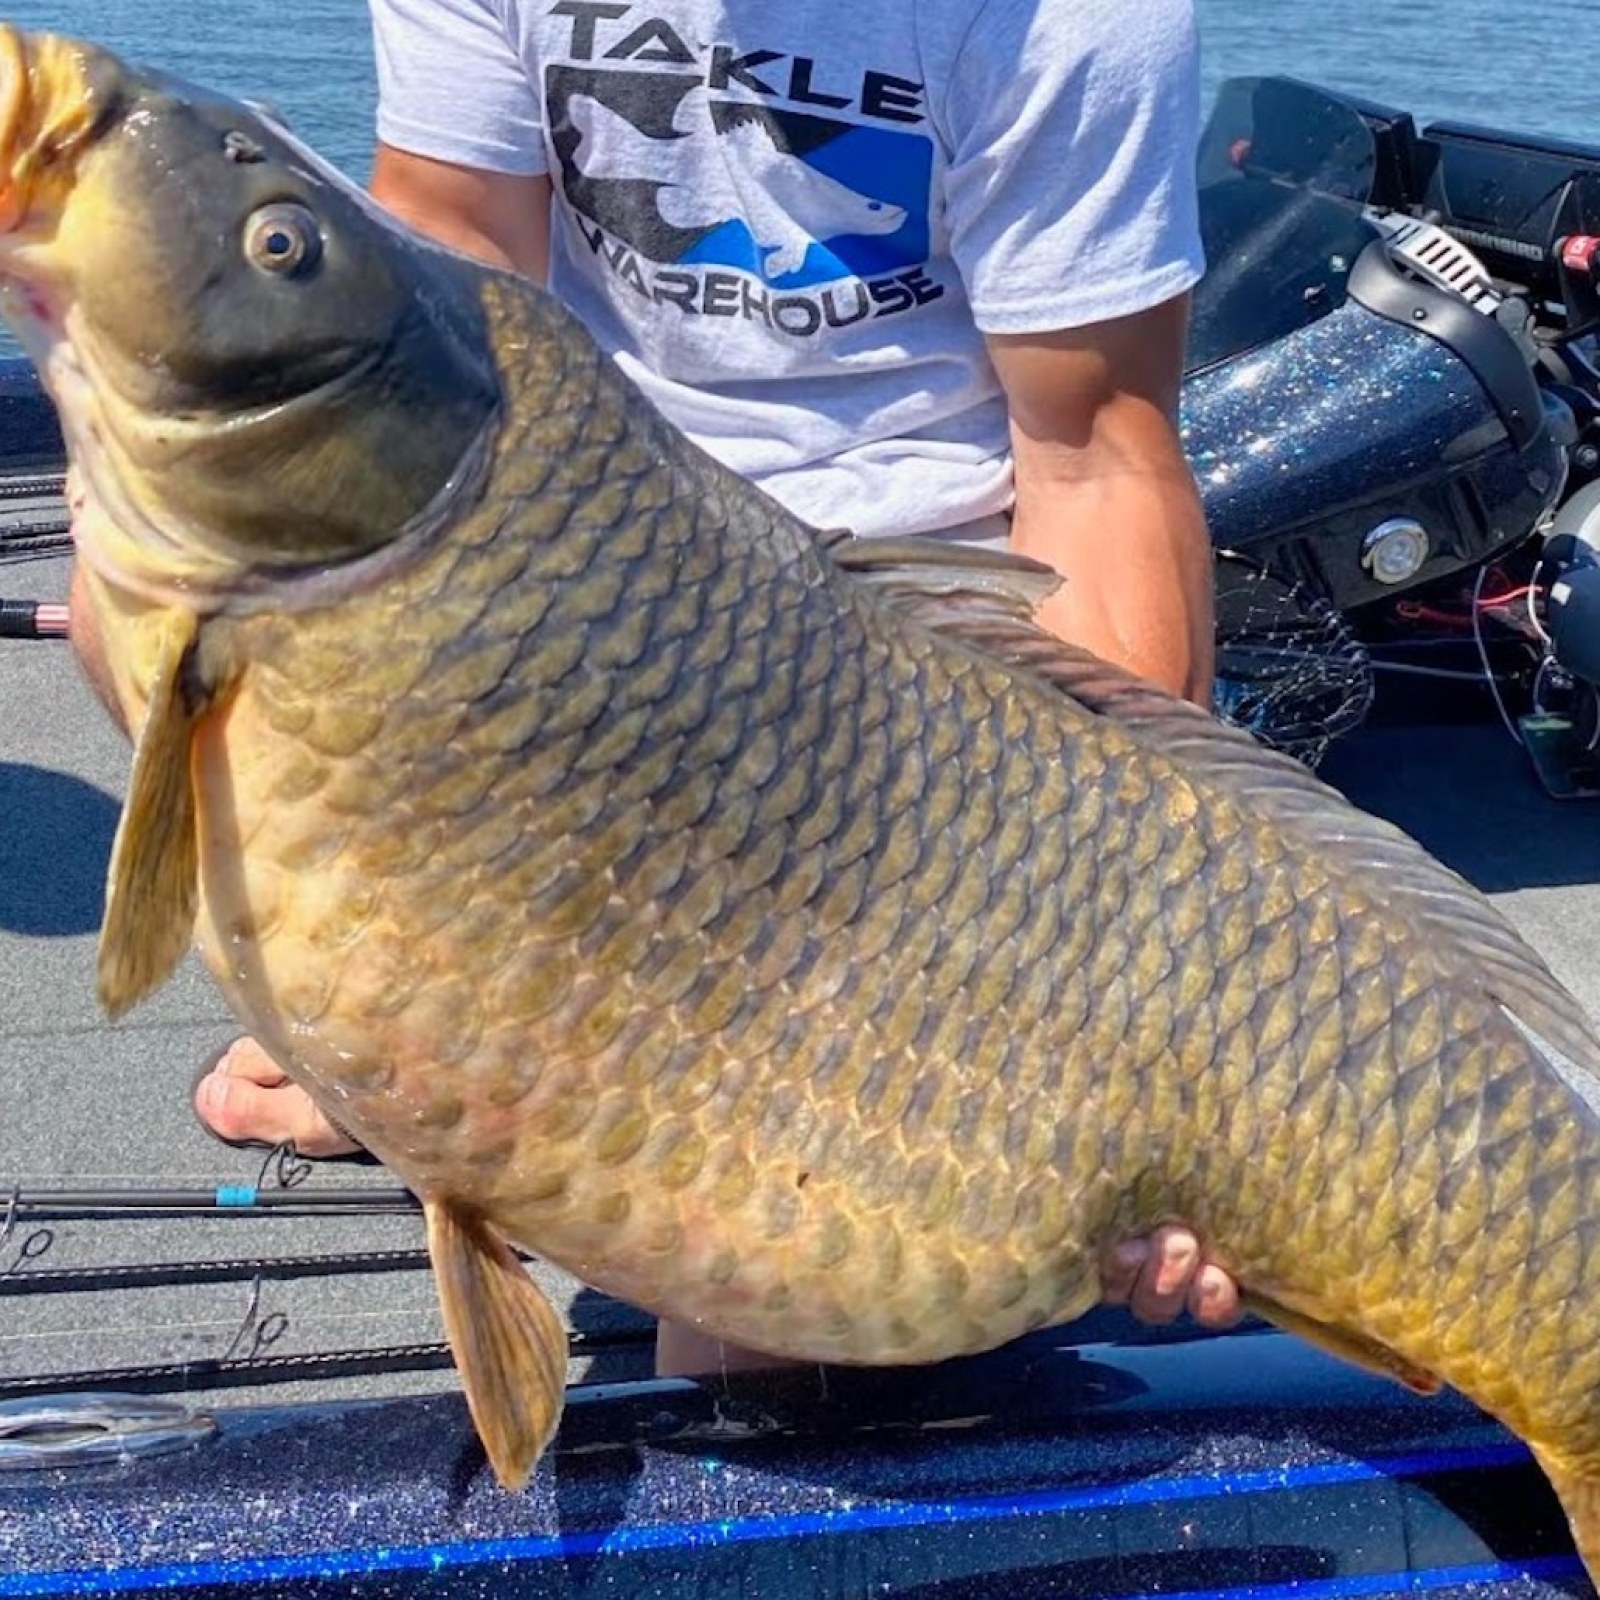 Never Seen One This Big Ever': Huge Carp Breaks 44-Year Maryland Record